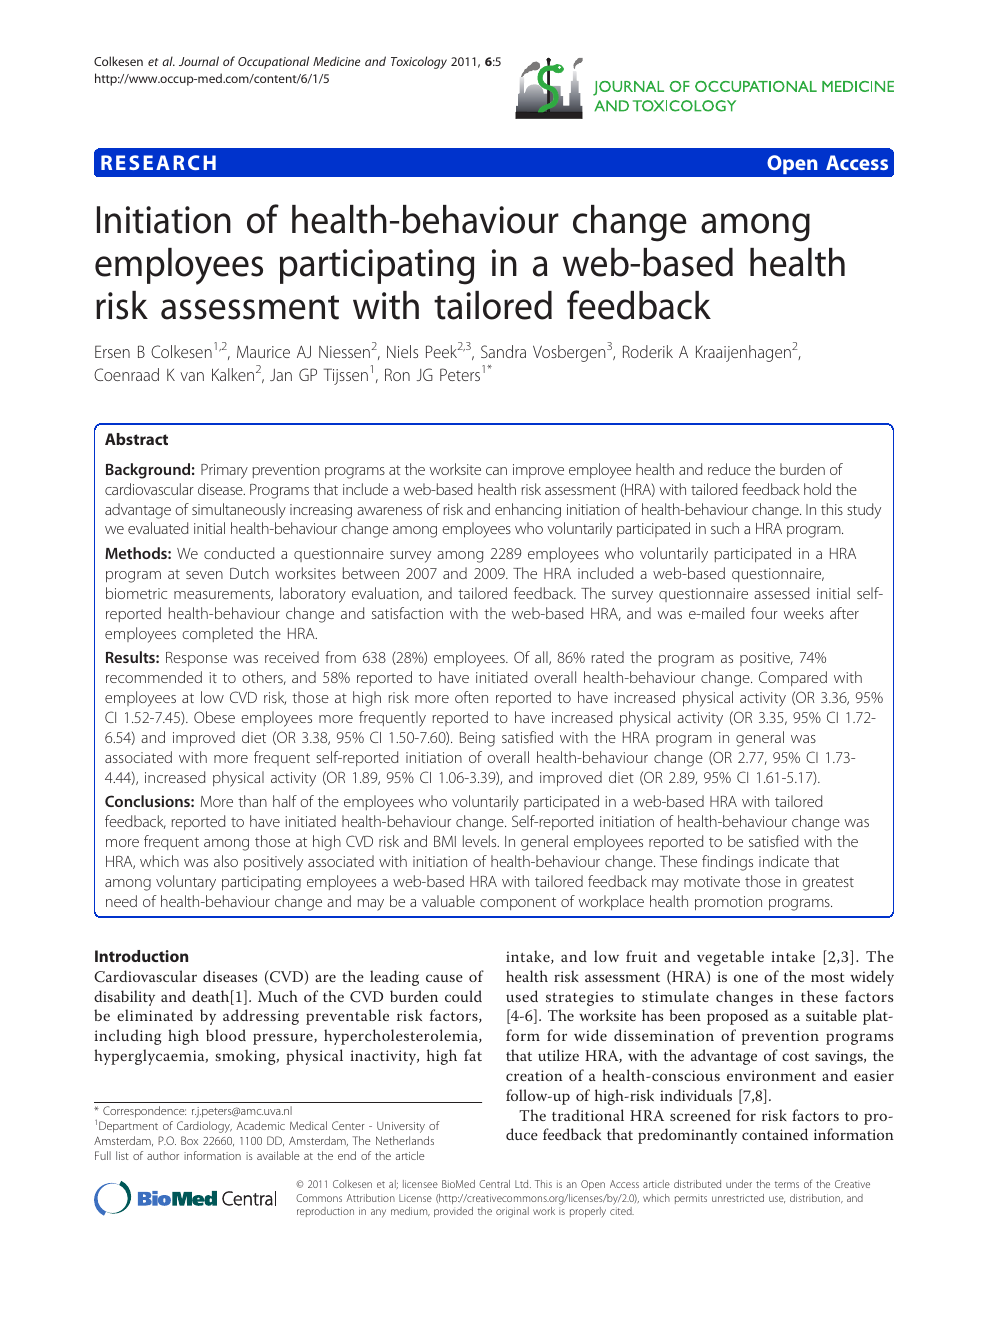 Initiation Of Health Behaviour Change Among Employees Participating In A Web Based Health Risk Assessment With Tailored Feedback Topic Of Research Paper In Health Sciences Download Scholarly Article Pdf And Read For Free